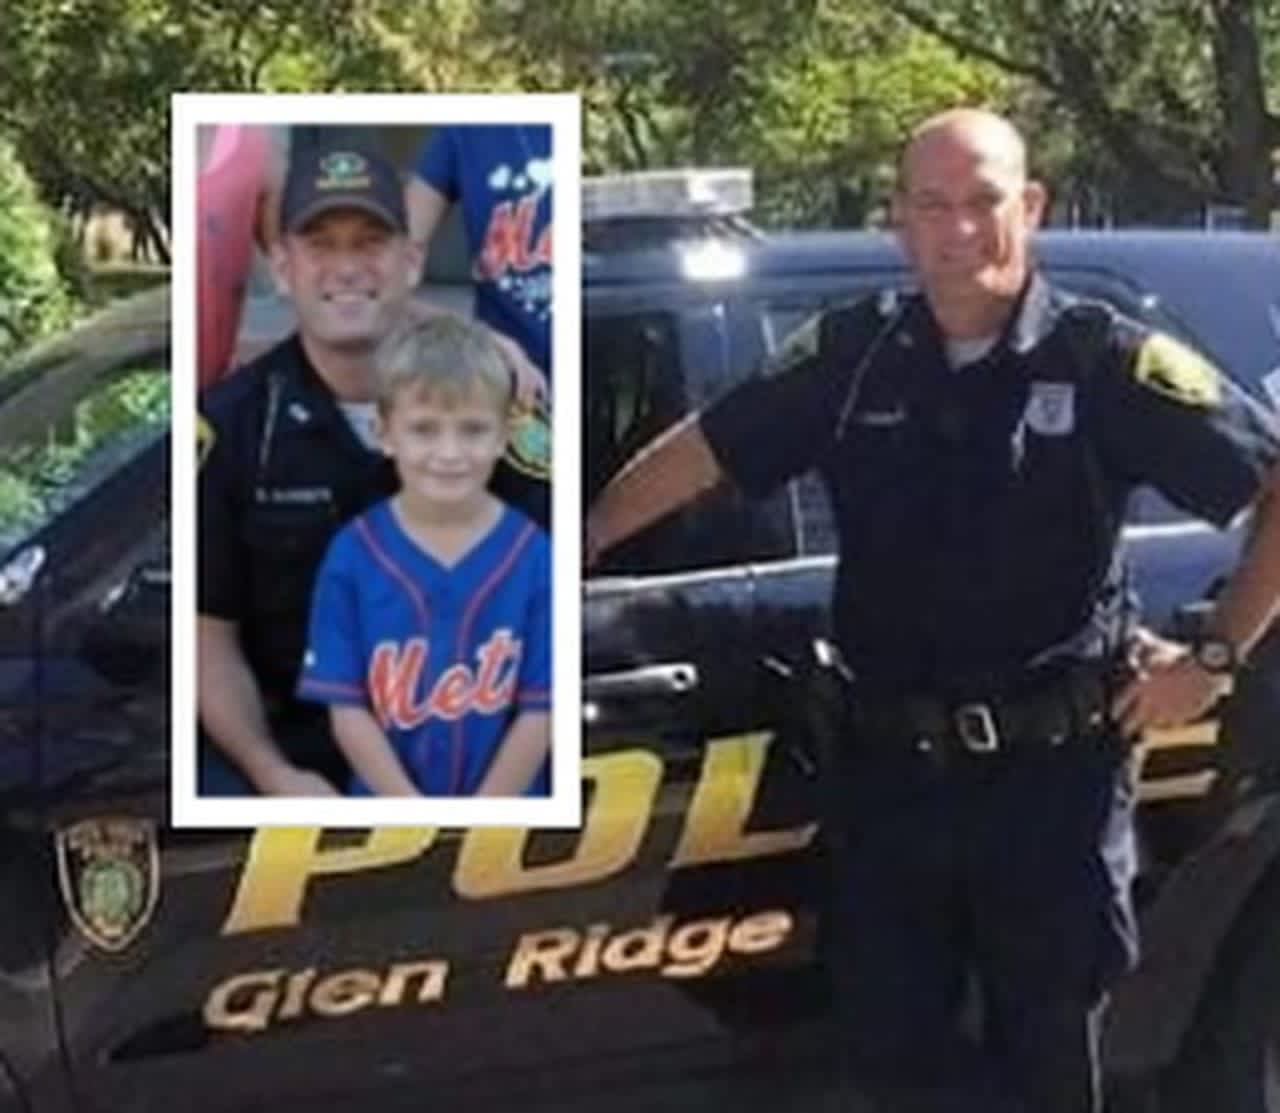 Glen Ridge Police Officer Charles "Rob" Roberts and son Gavin, who turned 12 Sunday.